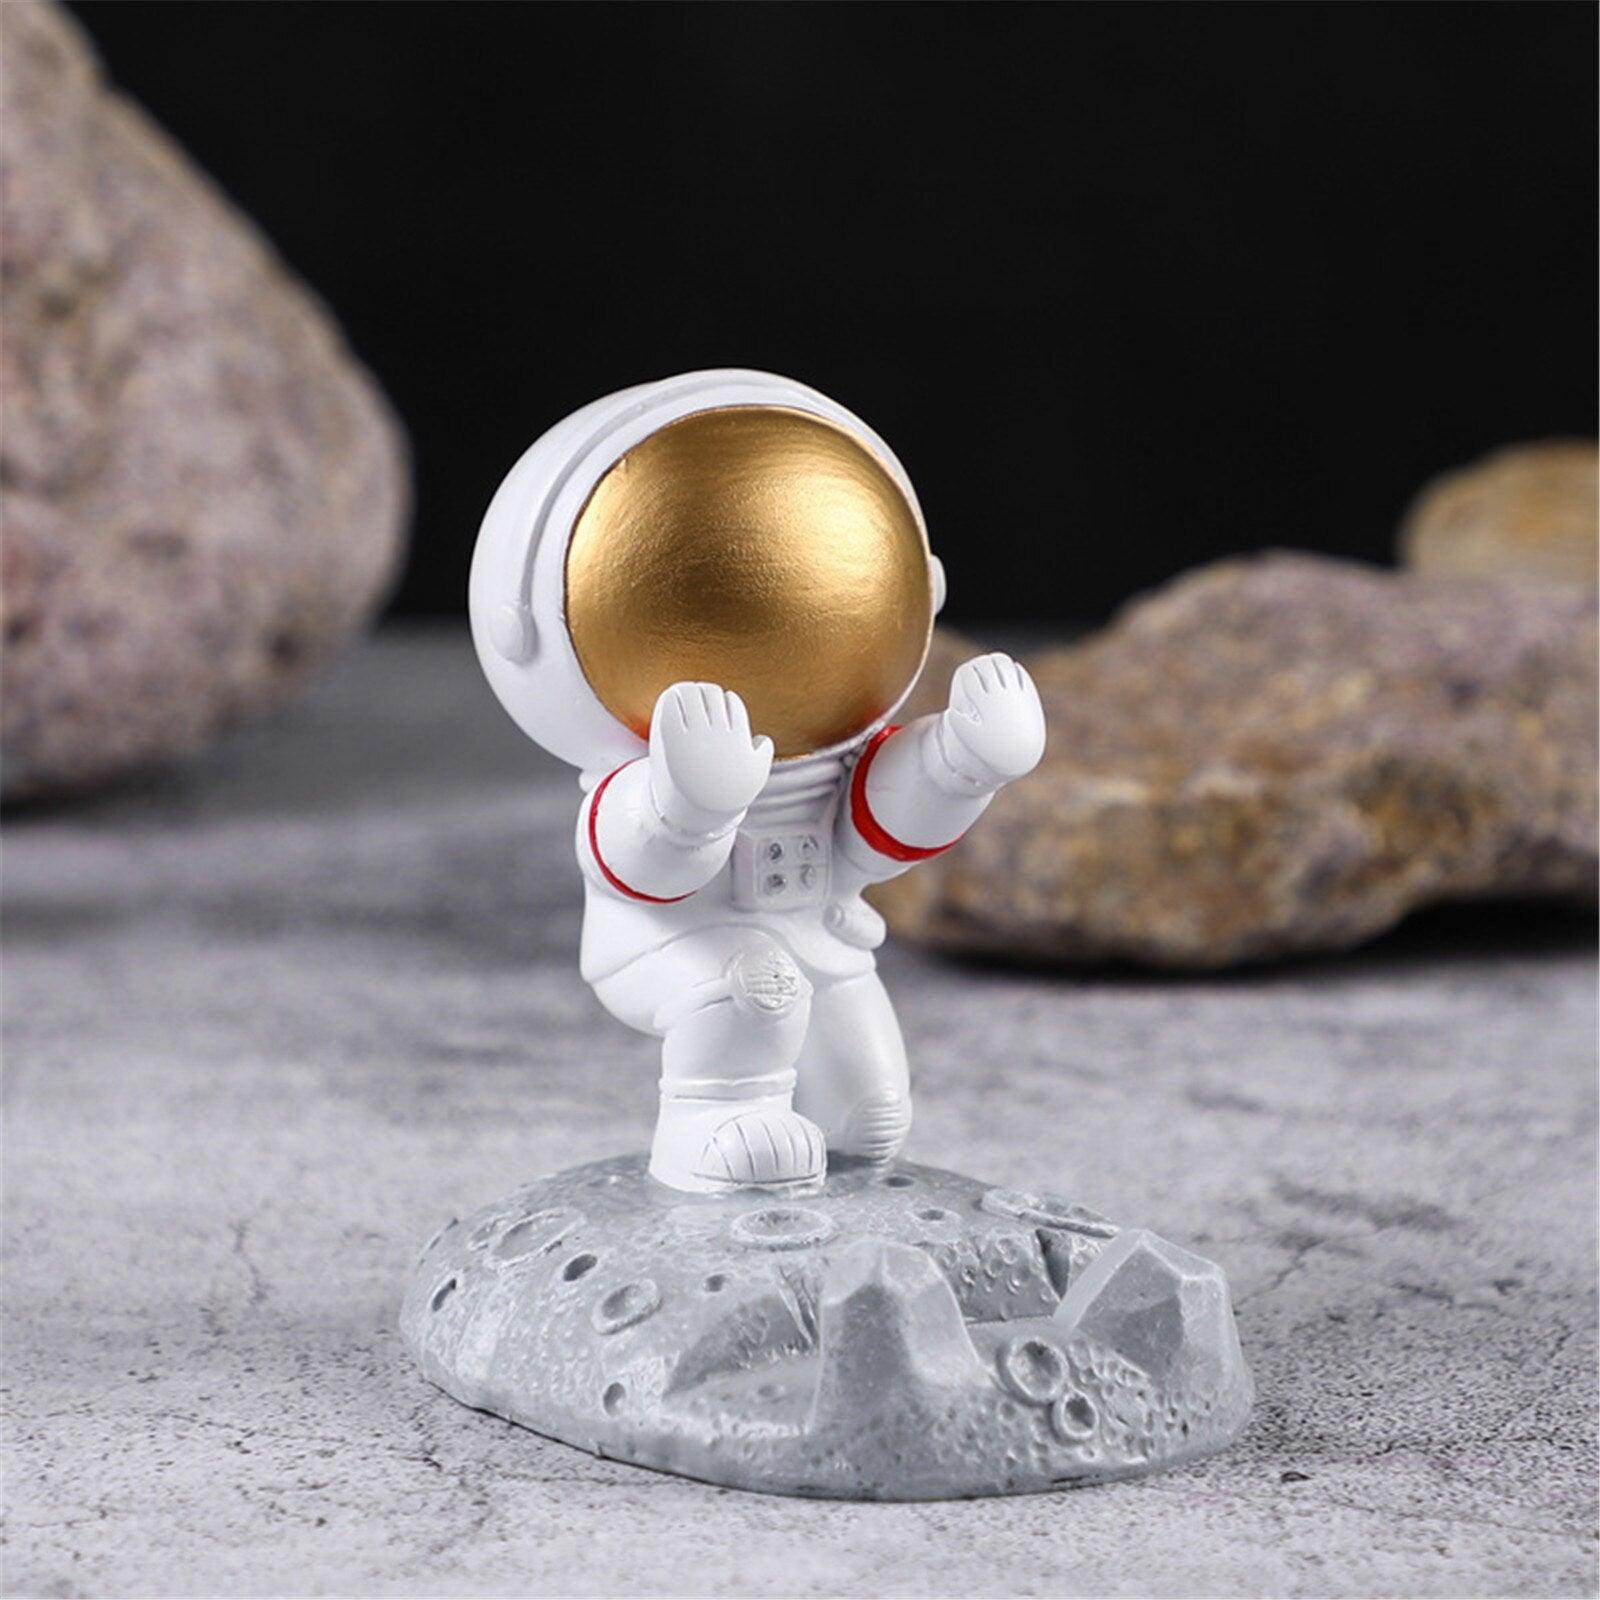 Astronaut Phone Holder - HOW DO I BUY THIS H